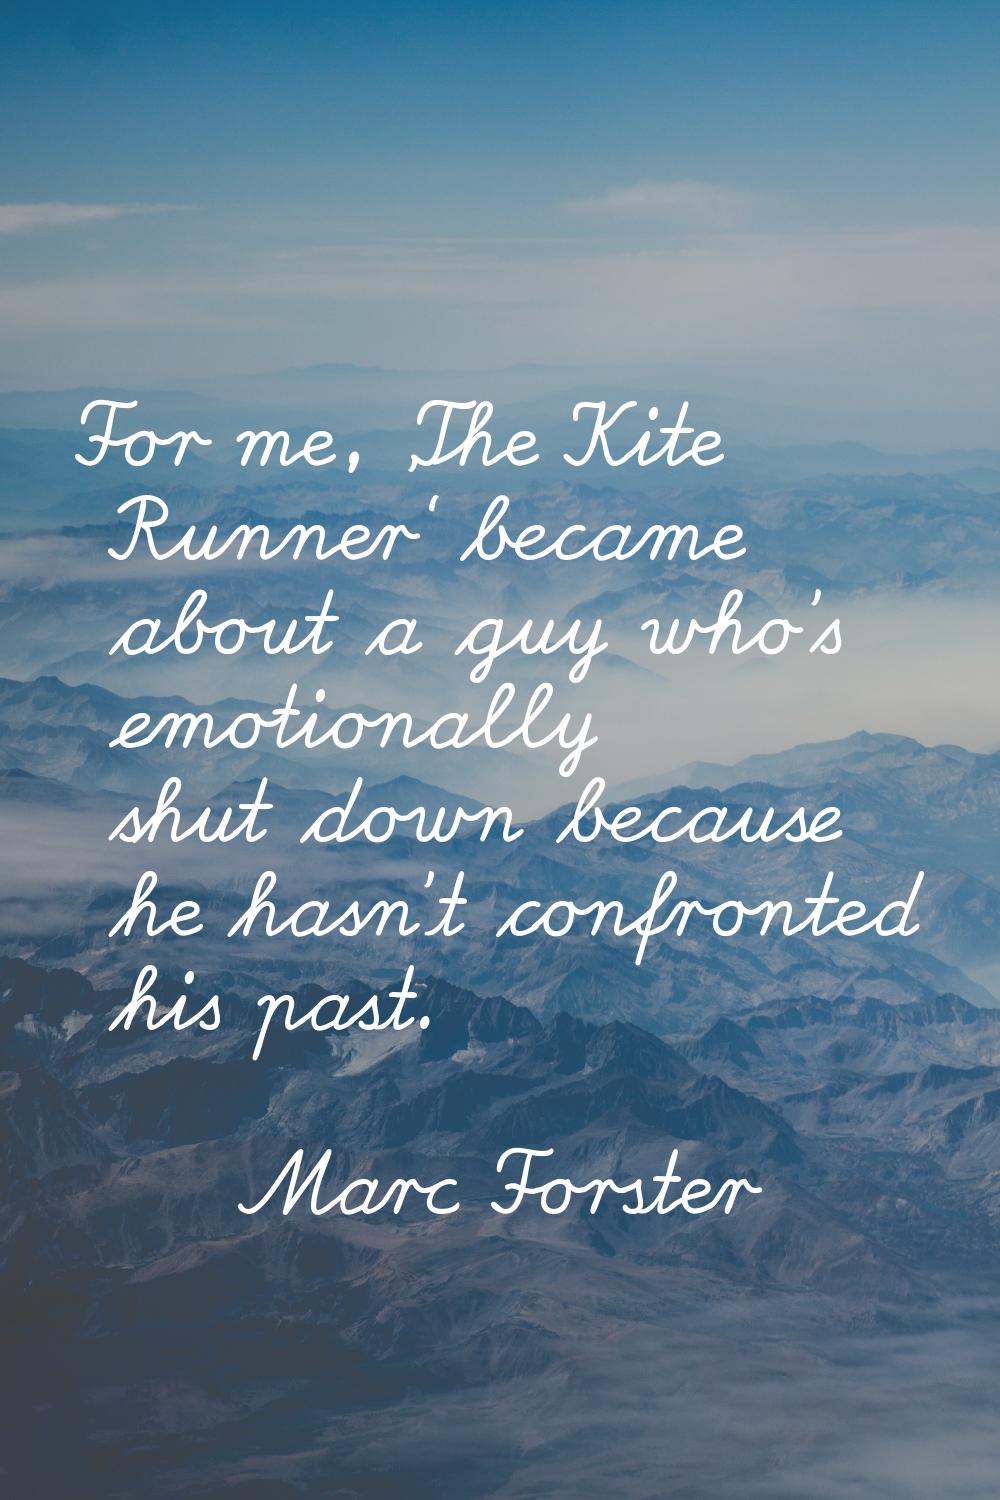 For me, 'The Kite Runner' became about a guy who's emotionally shut down because he hasn't confront